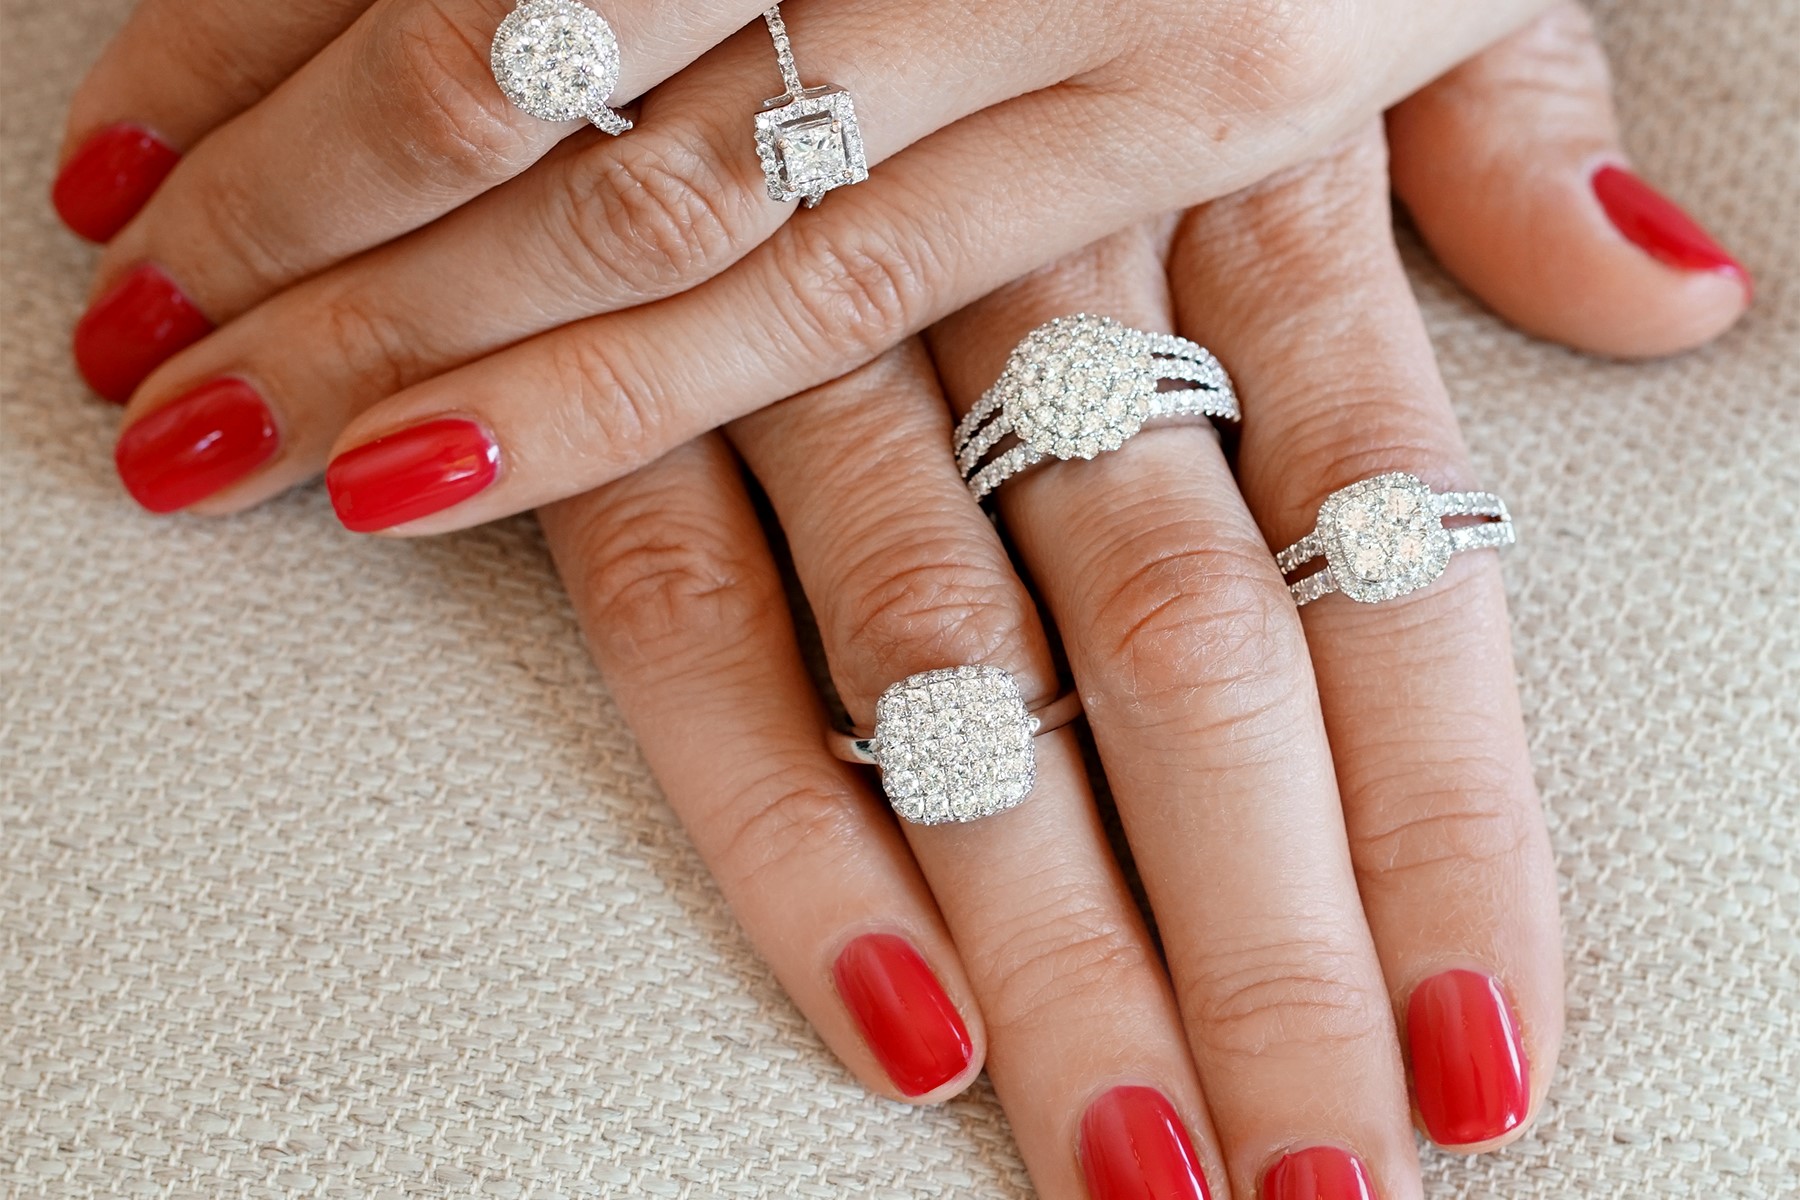 When Is the Best Time to Buy an Engagement Ring?